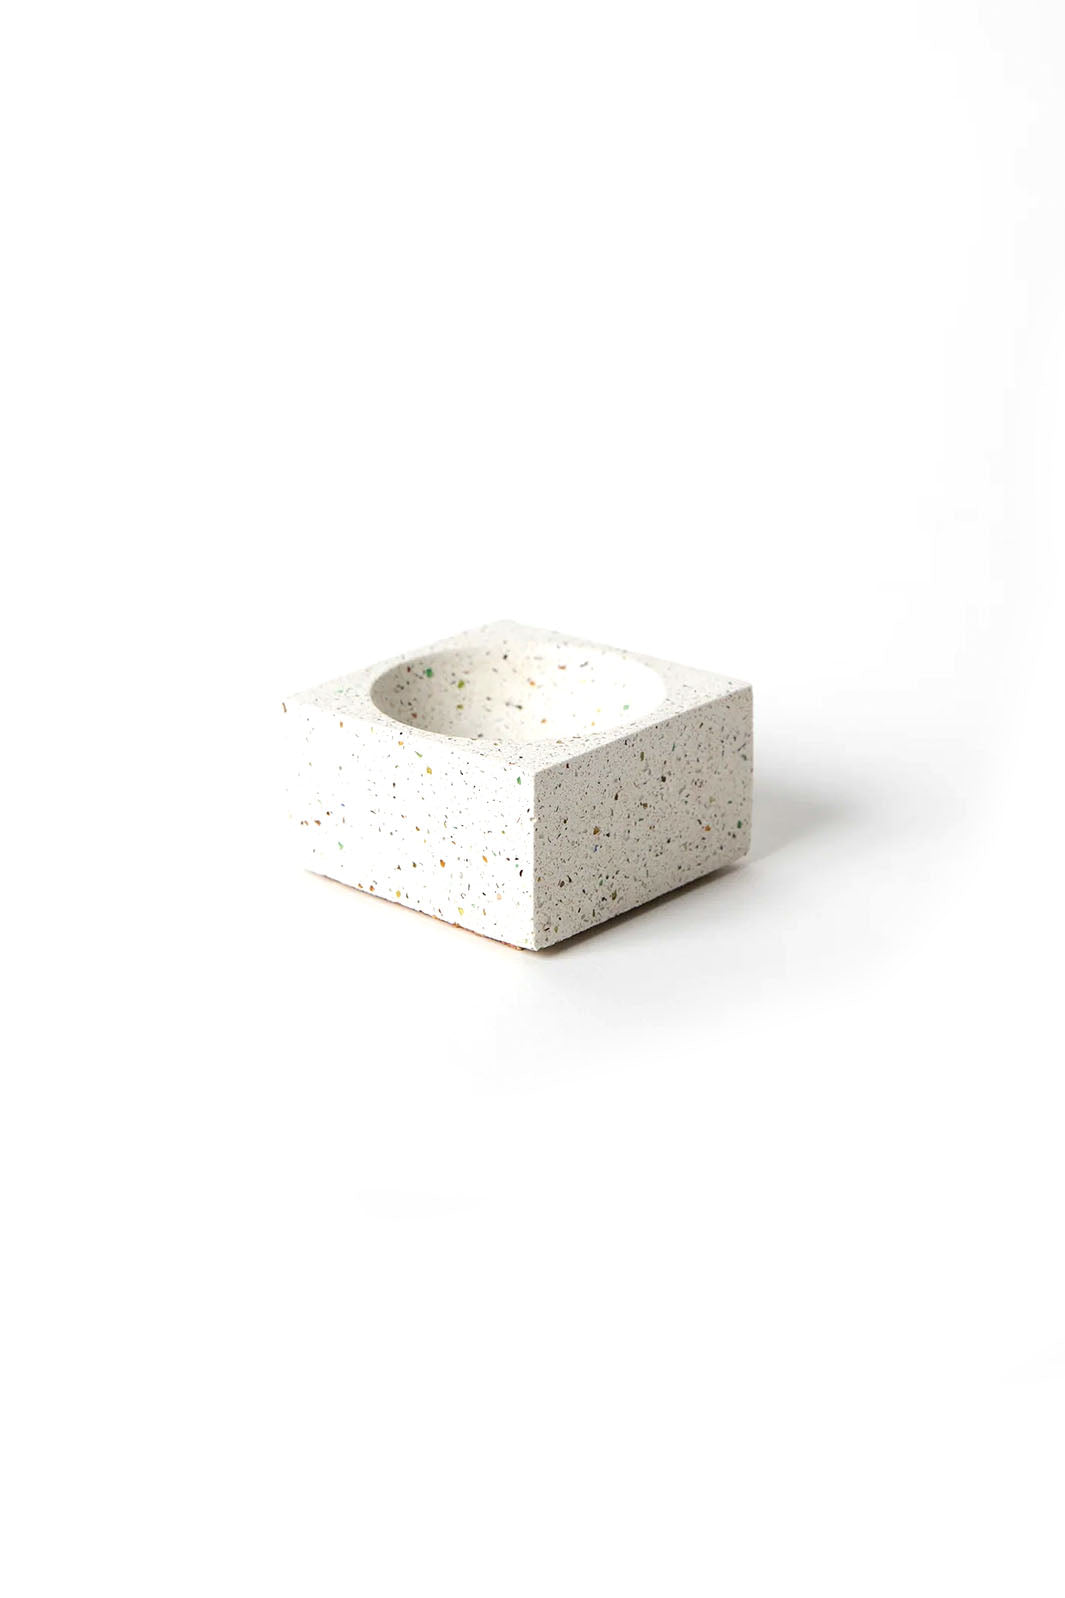 White concrete terrazzo square incense holder with a rounded inset center for the incense stick or cone